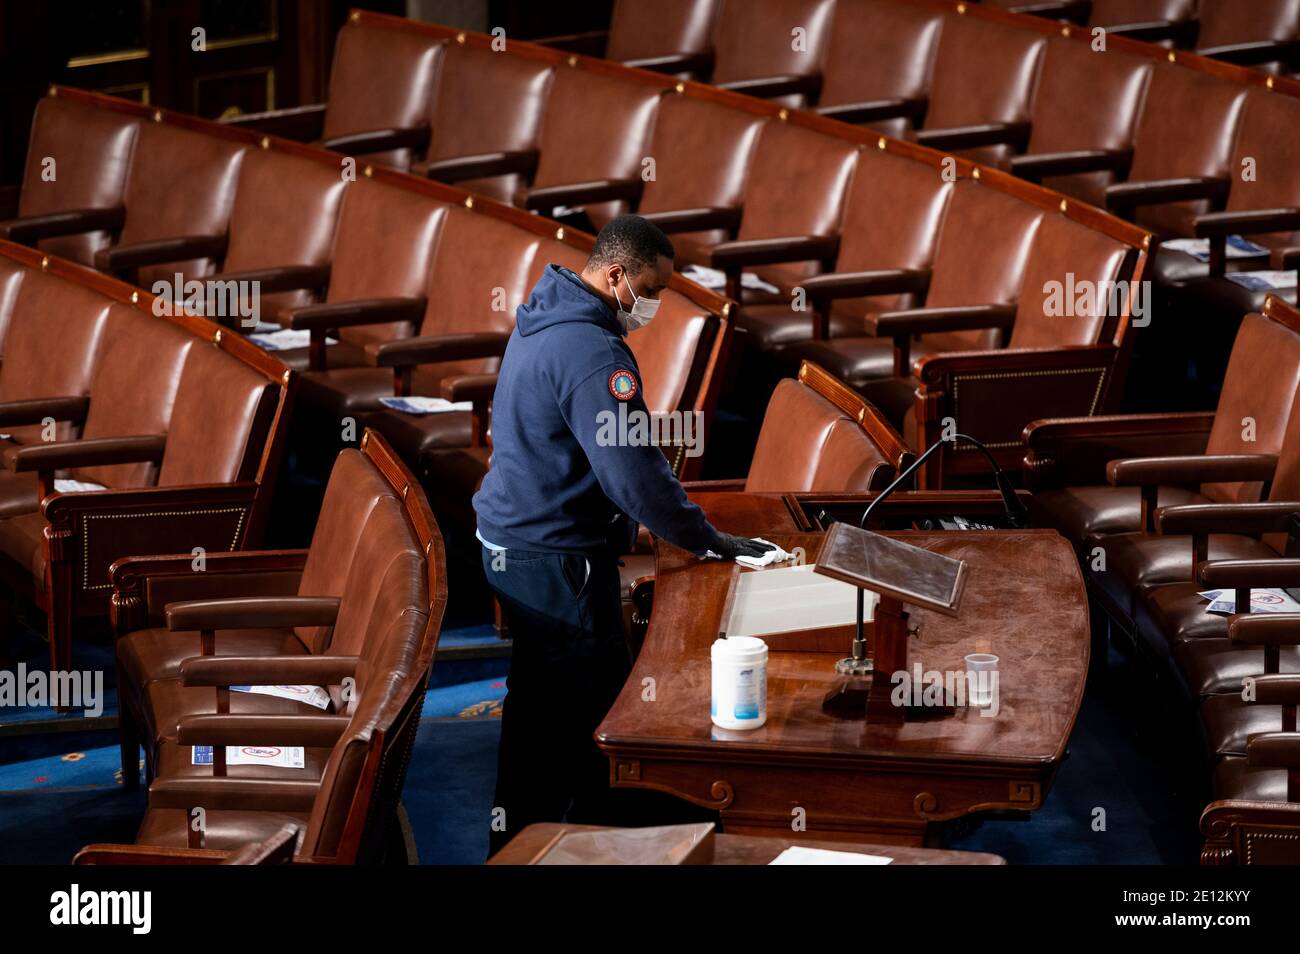 United States Capitol workers disinfect the House floor in the Capitol before members of the 117th Congress are sworn in on Sunday, January 3, 2021. Credit: Bill Clark/Pool via CNP /MediaPunch Stock Photo